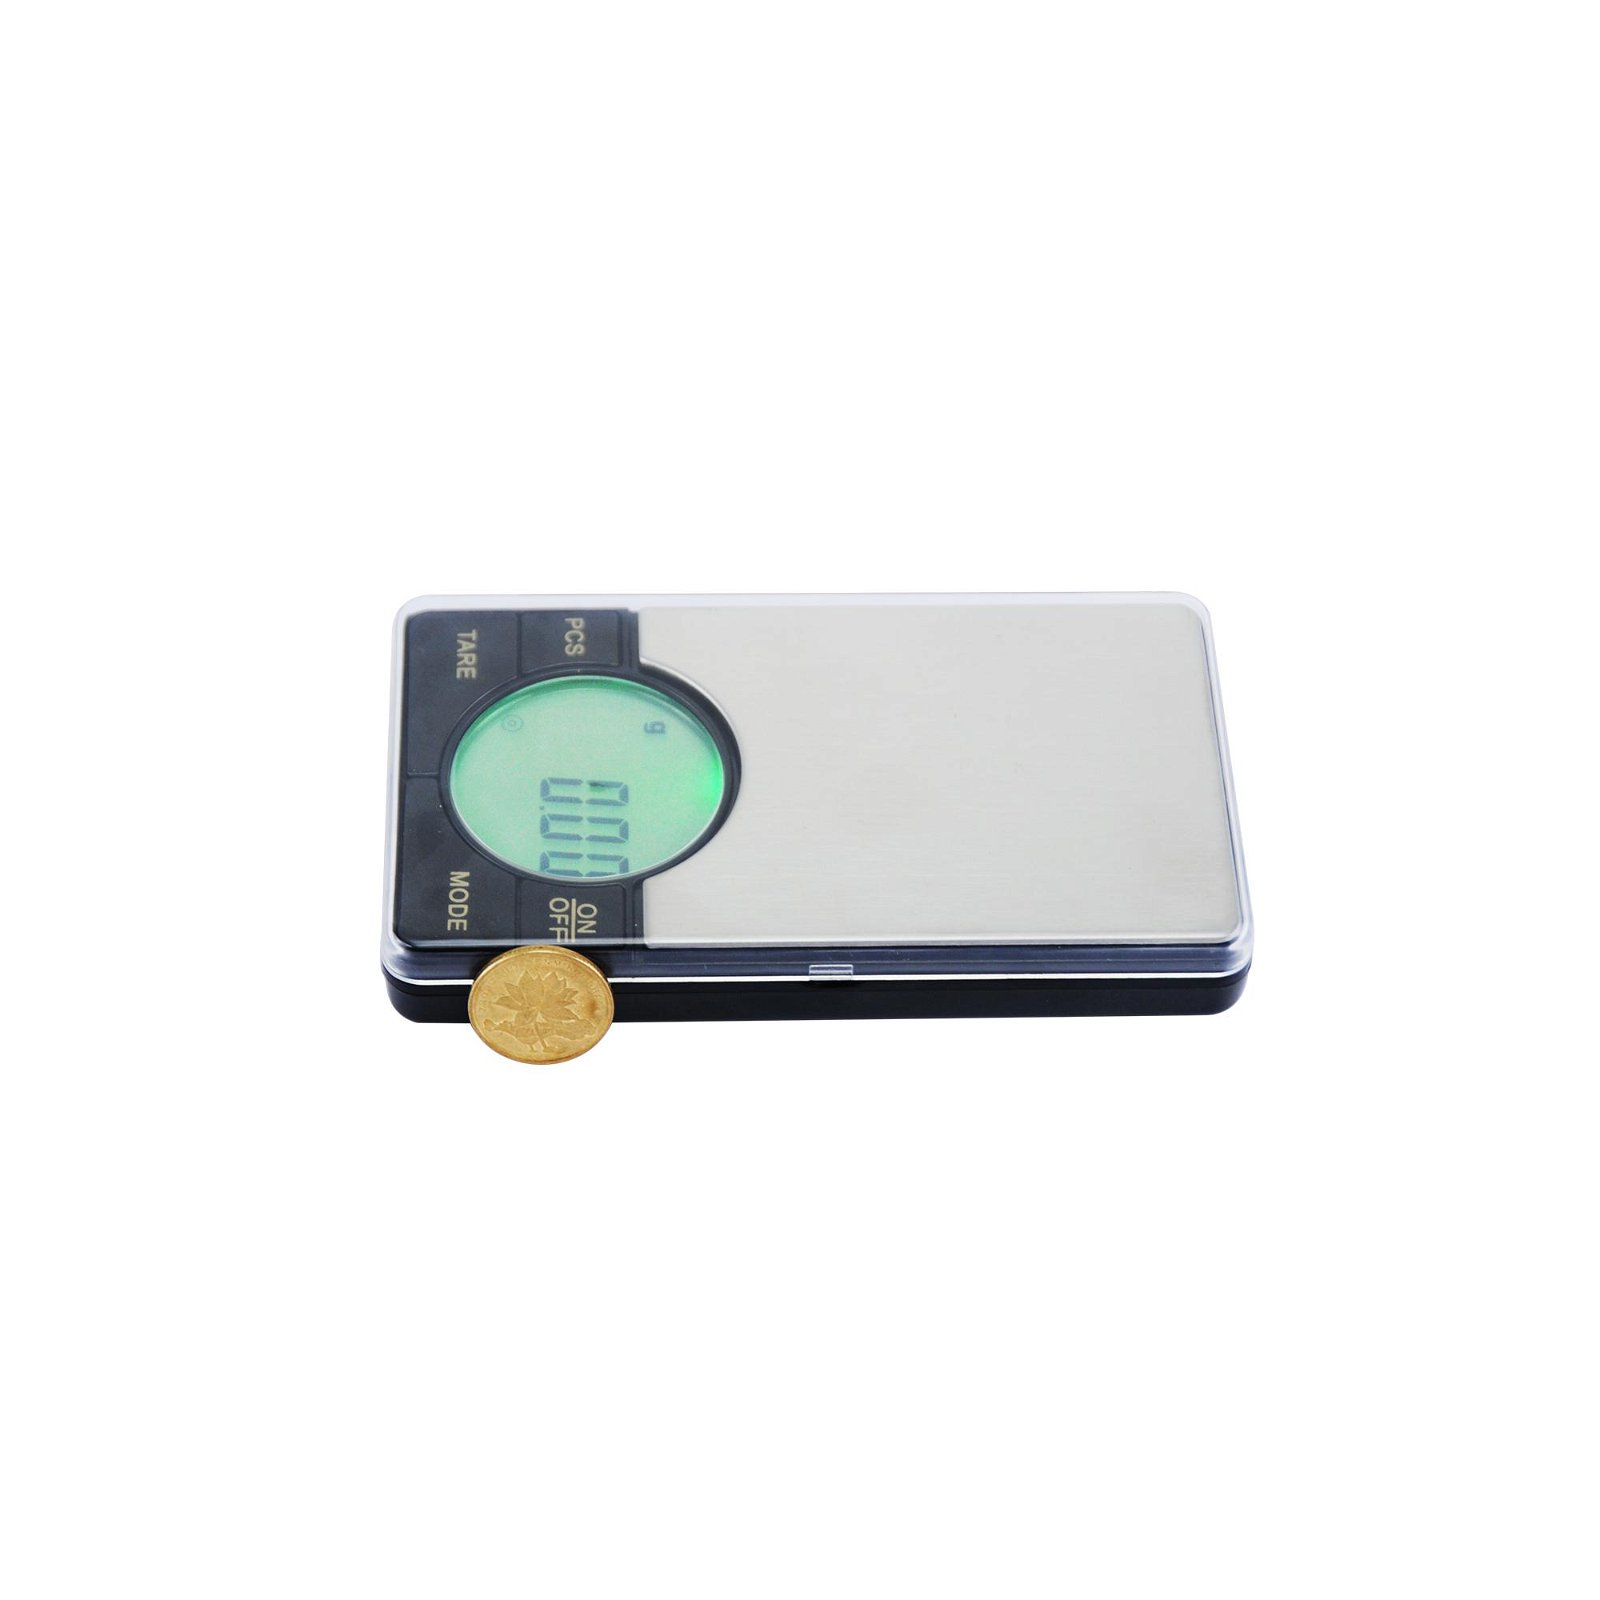 Jewelry portable gold pocket scale 2